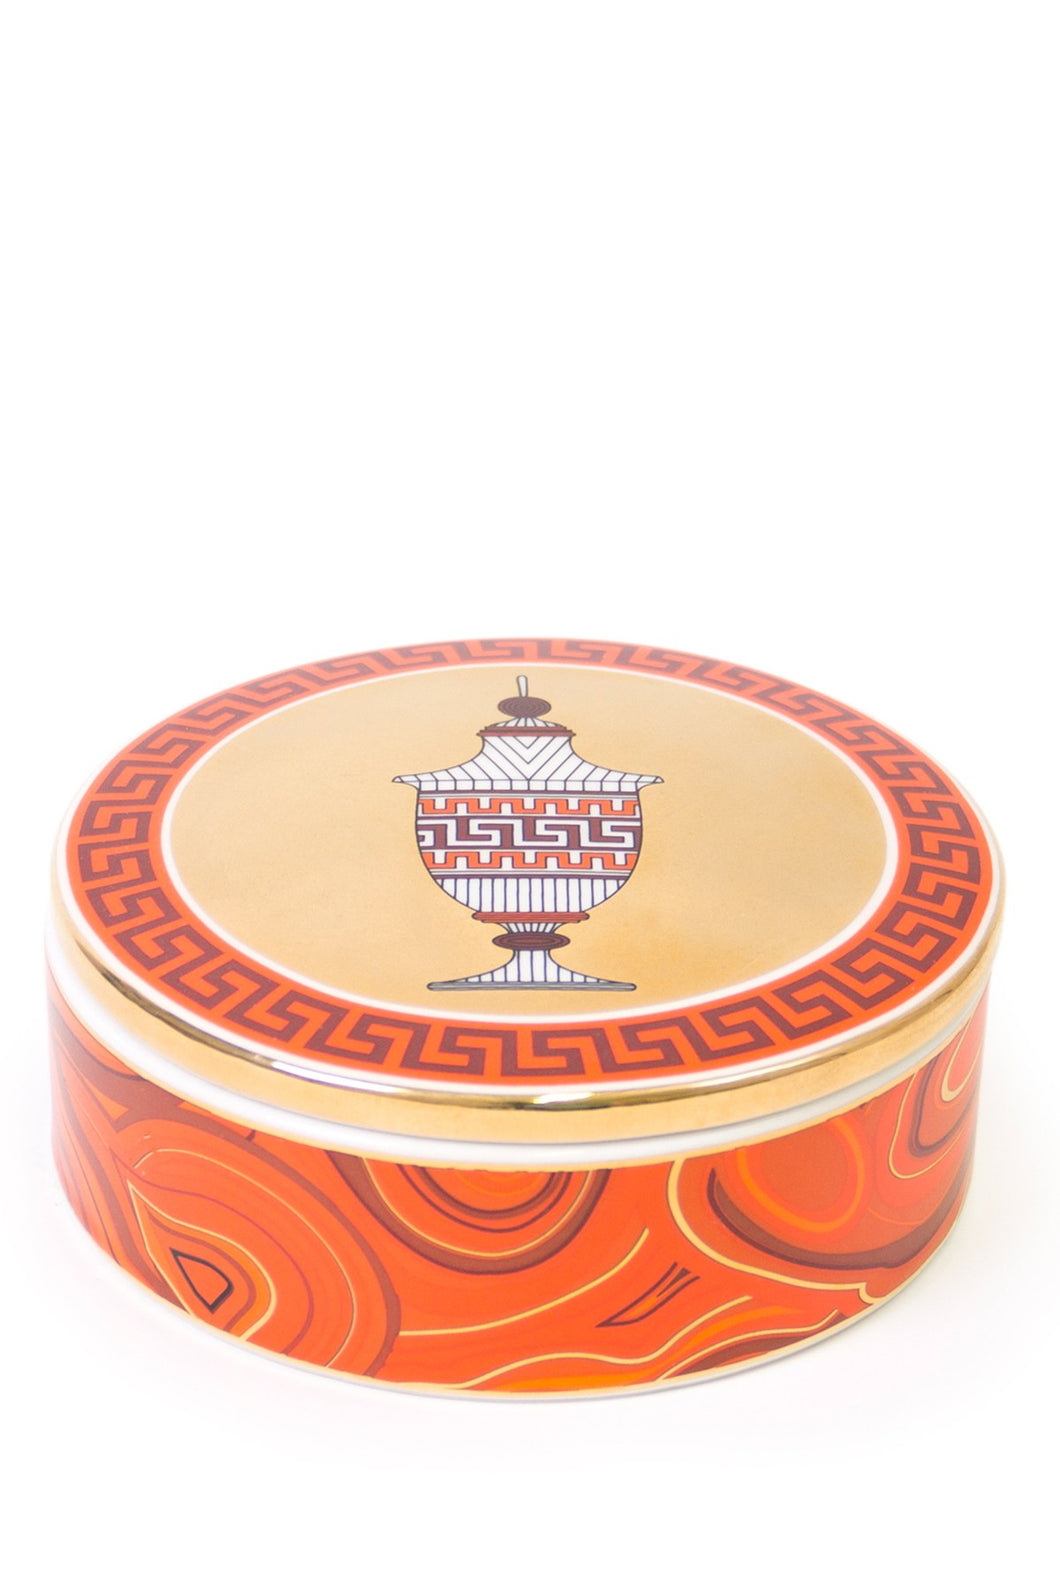 Jonathan Adler Luxembourg Pagoda Trinket Box - Red And Gold